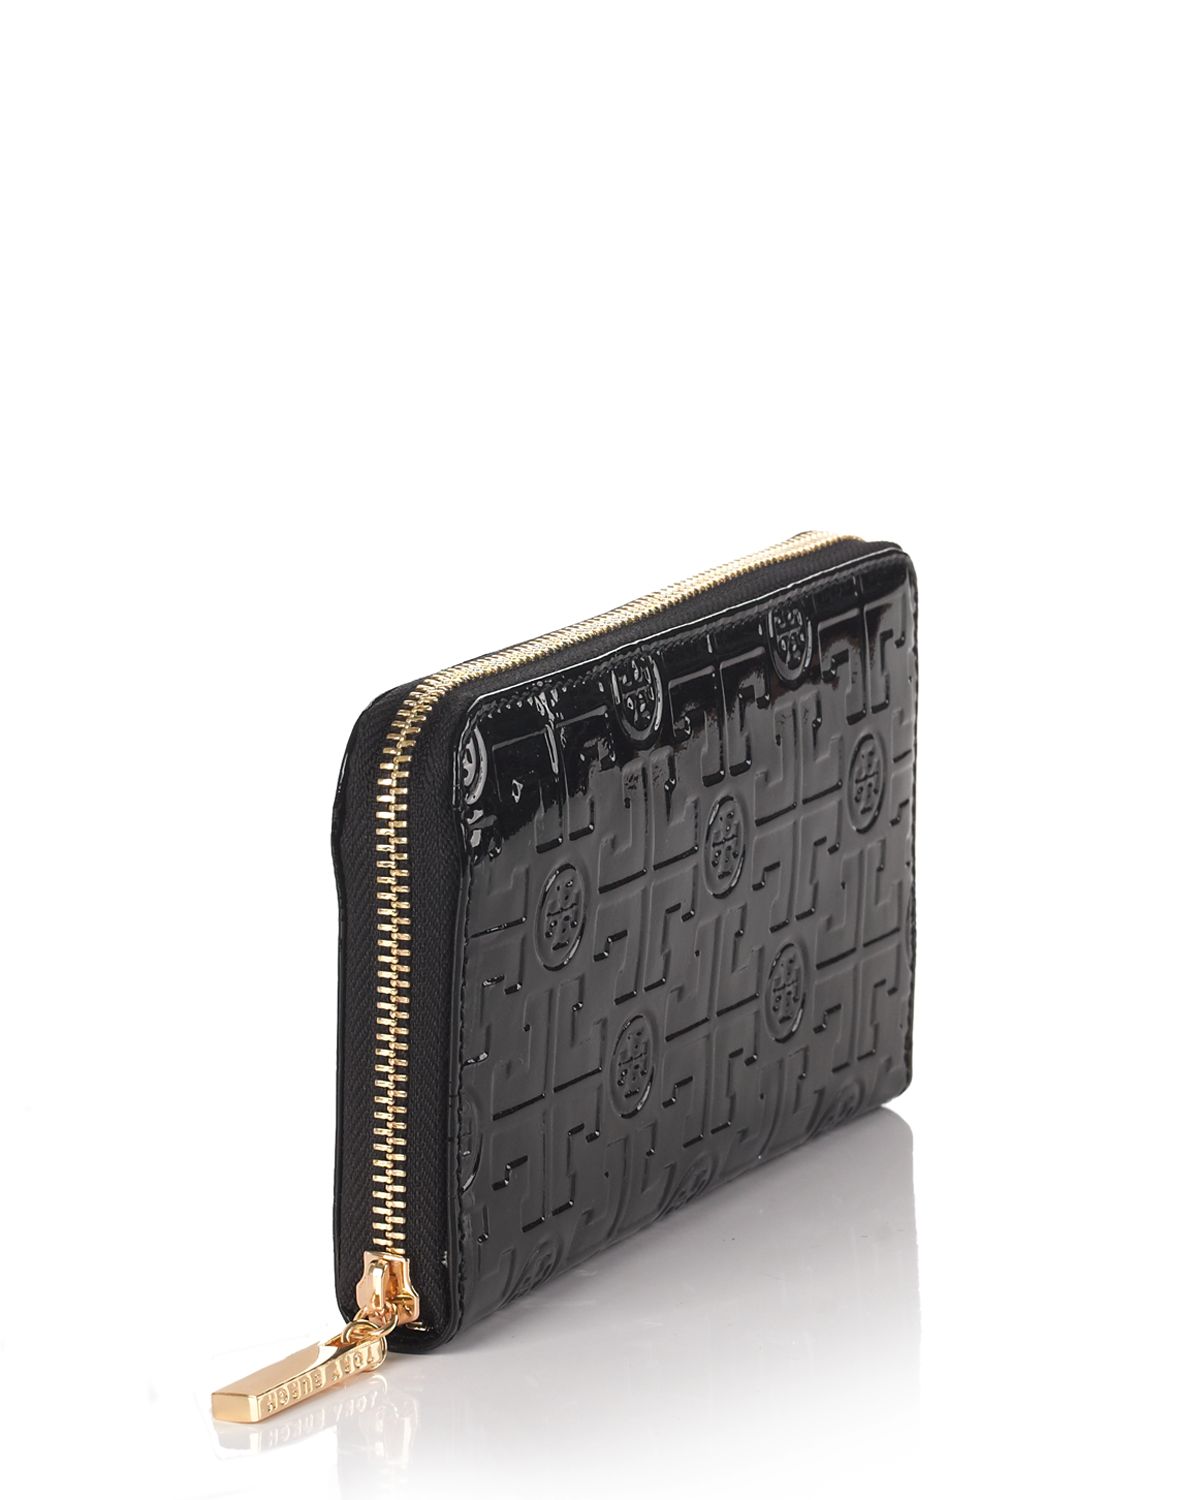 Tory Burch Embossed Lux Patent Leather Continental Wallet in Black - Lyst